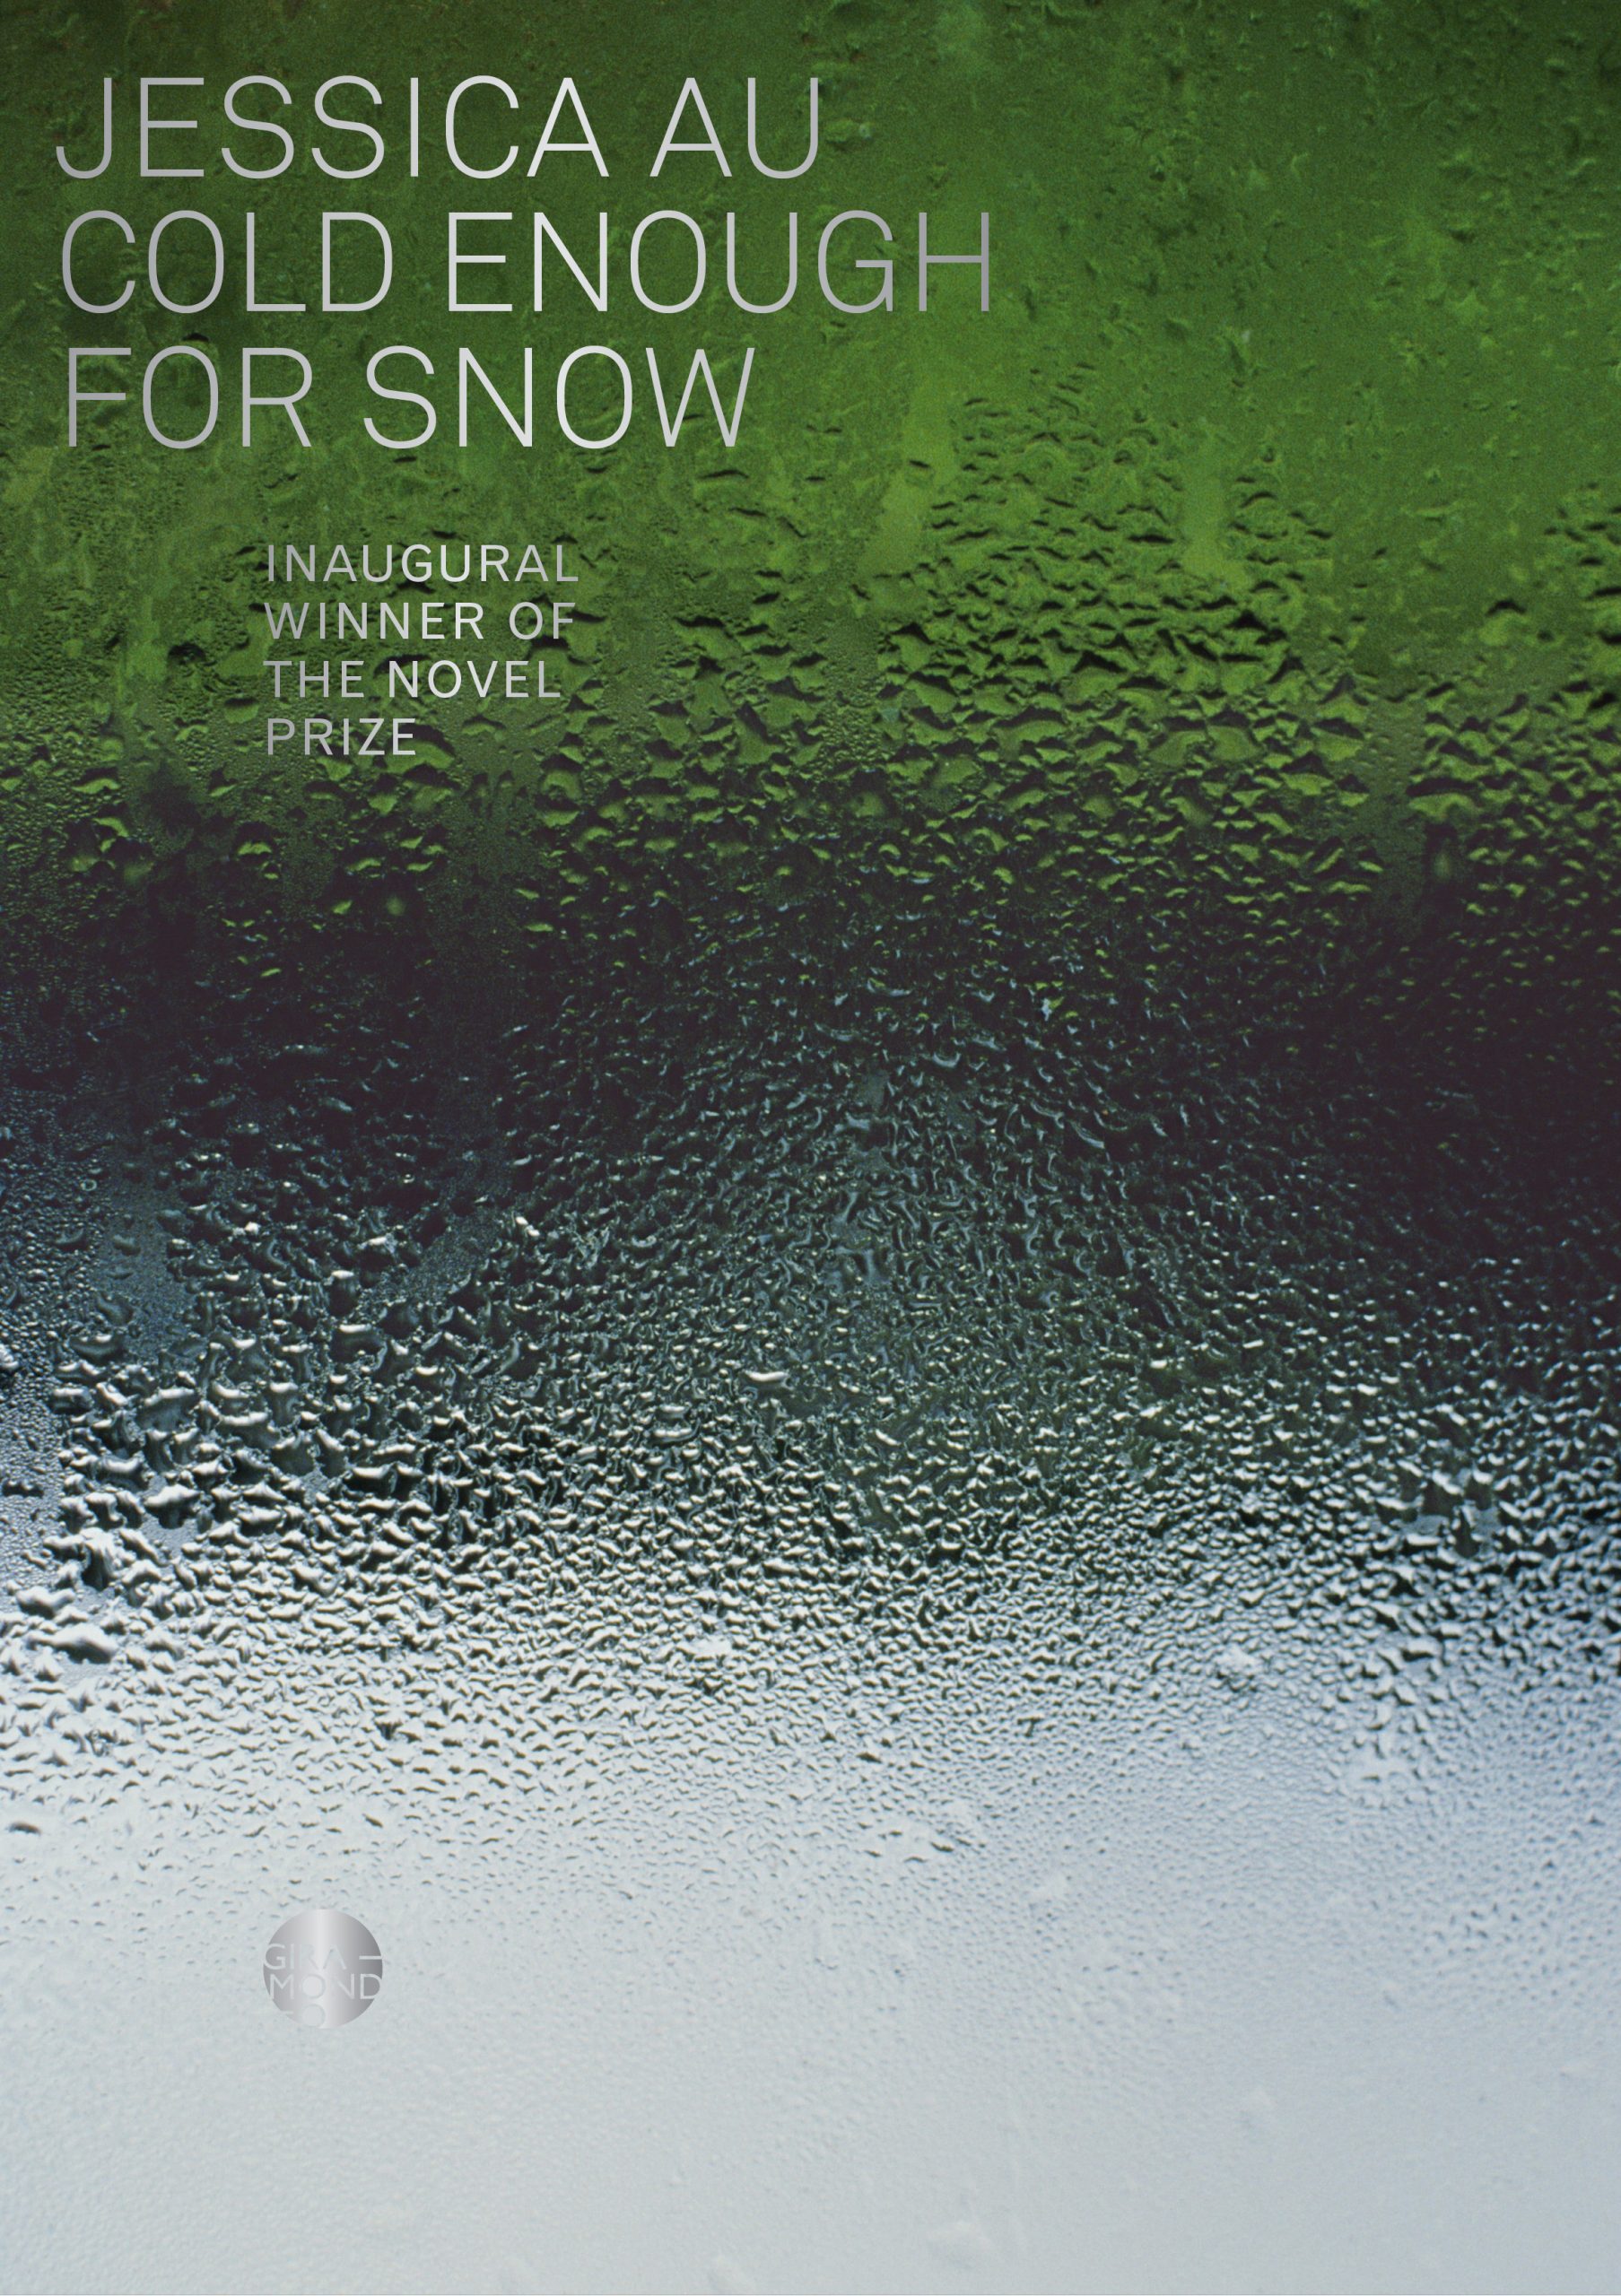 The cover of Cold Enough for Snow by Jessica Au, which depicts a window with raindrops on it